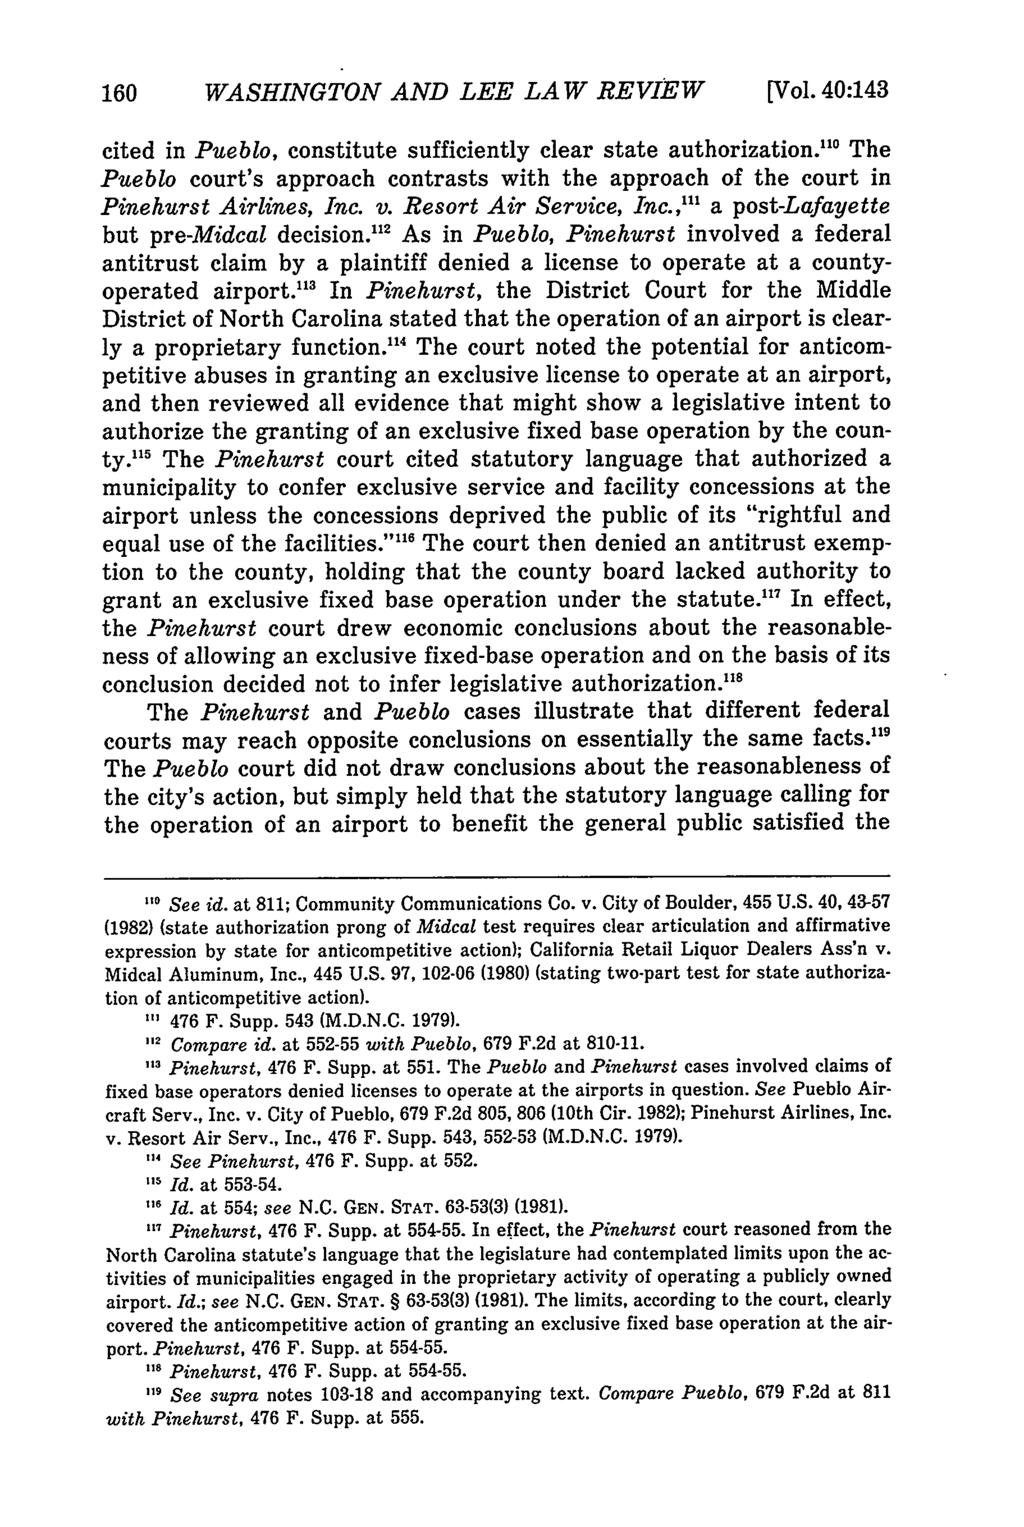 WASHINGTON AND LEE LAW REVIEW [Vol. 40:143 cited in Pueblo, constitute sufficiently clear state authorization.